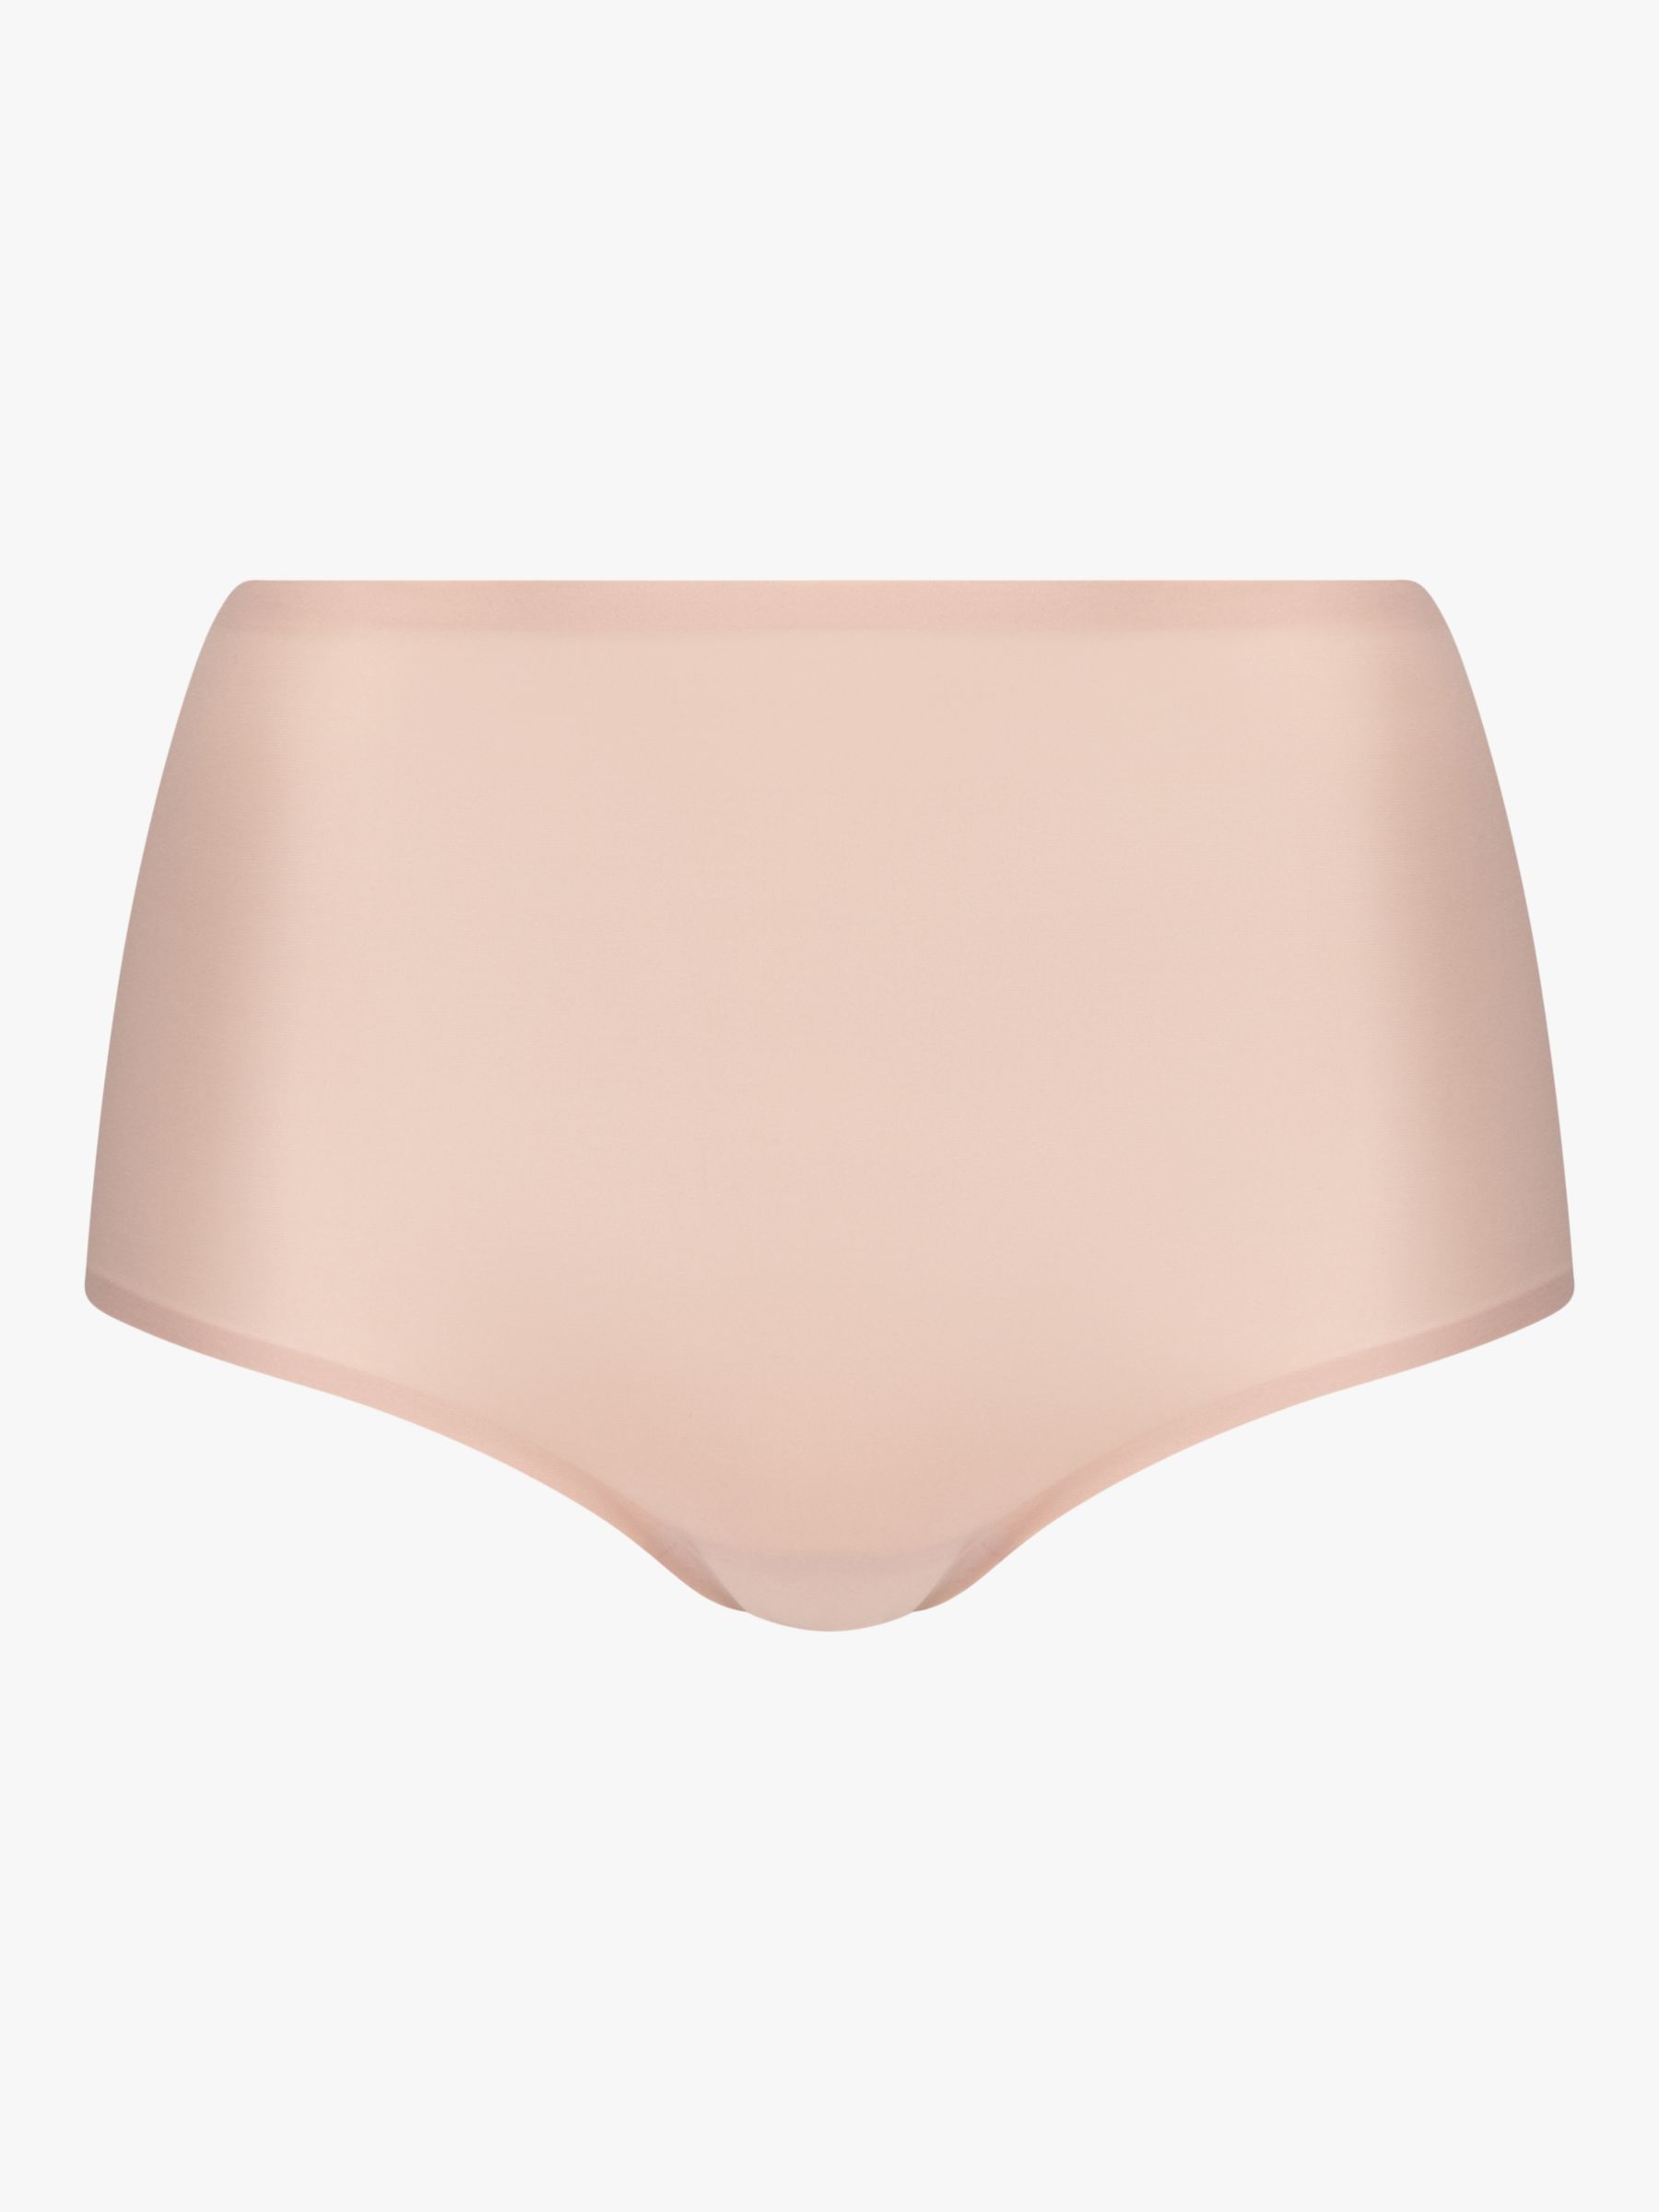 Chantelle Soft Stretch High Waisted Knickers, Dusky Pink, One Size